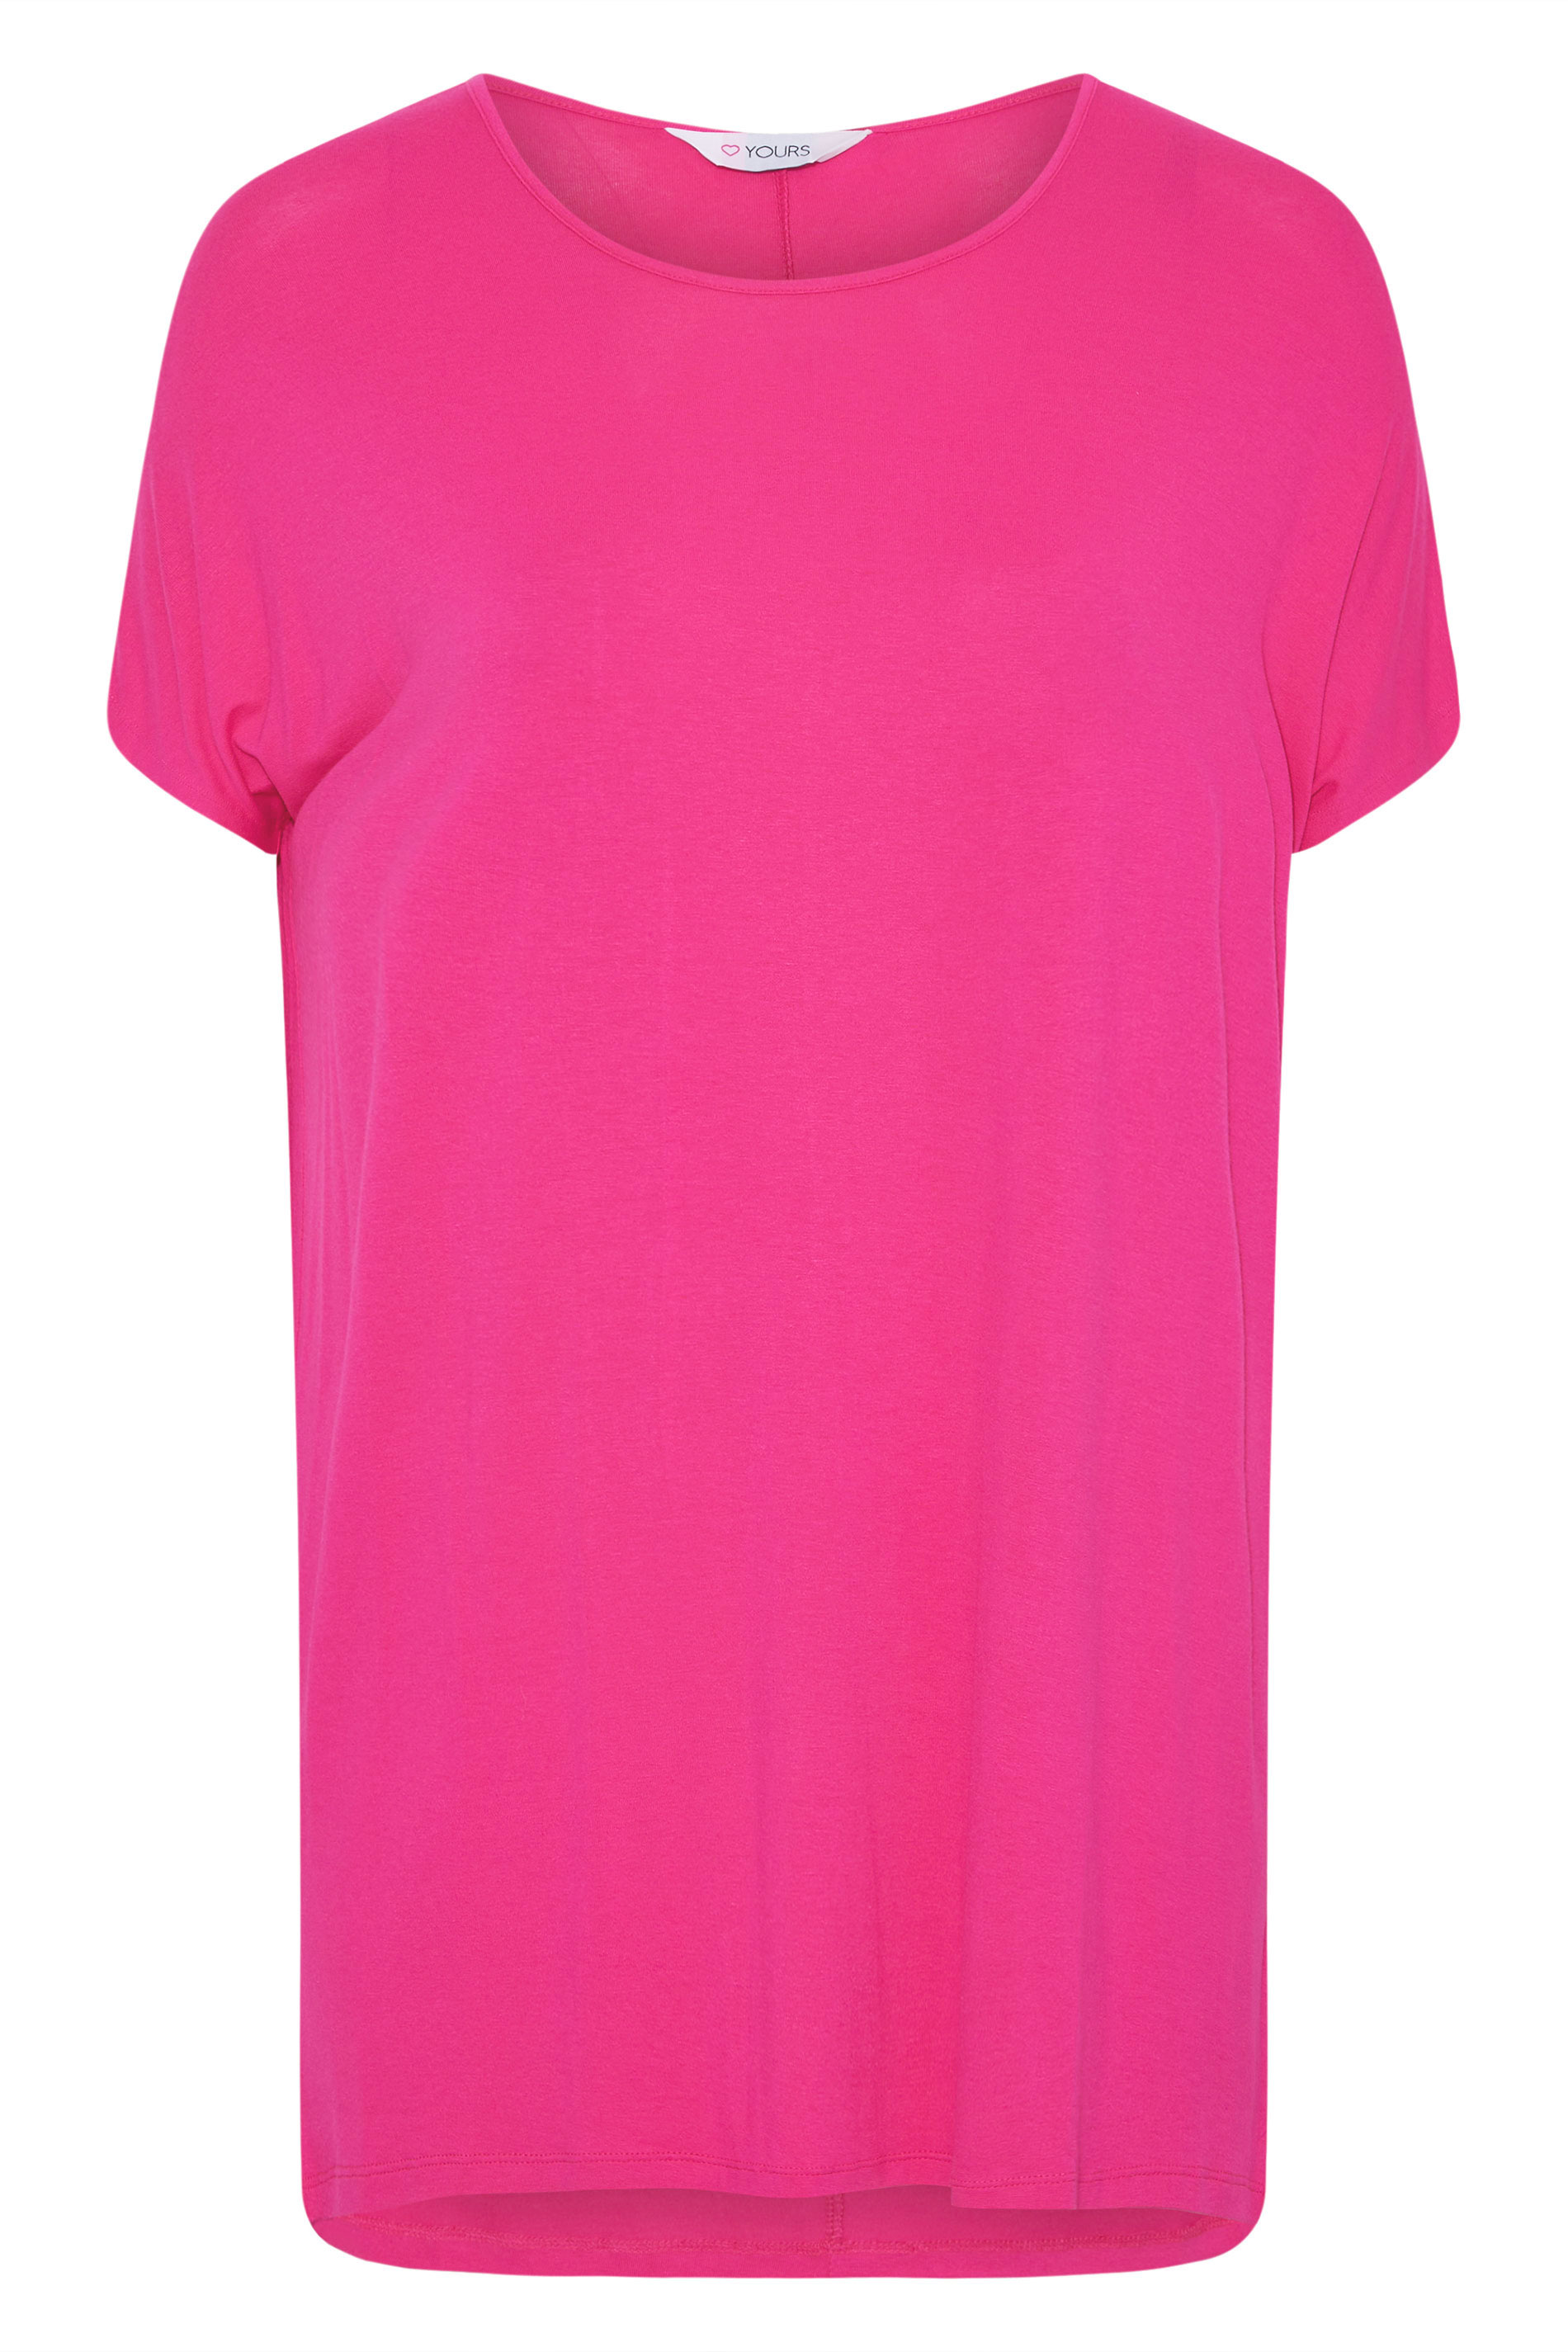 Grande taille  Tops Grande taille  T-Shirts | T-Shirt Rose Flashy Manches Courtes Jersey - JK35109